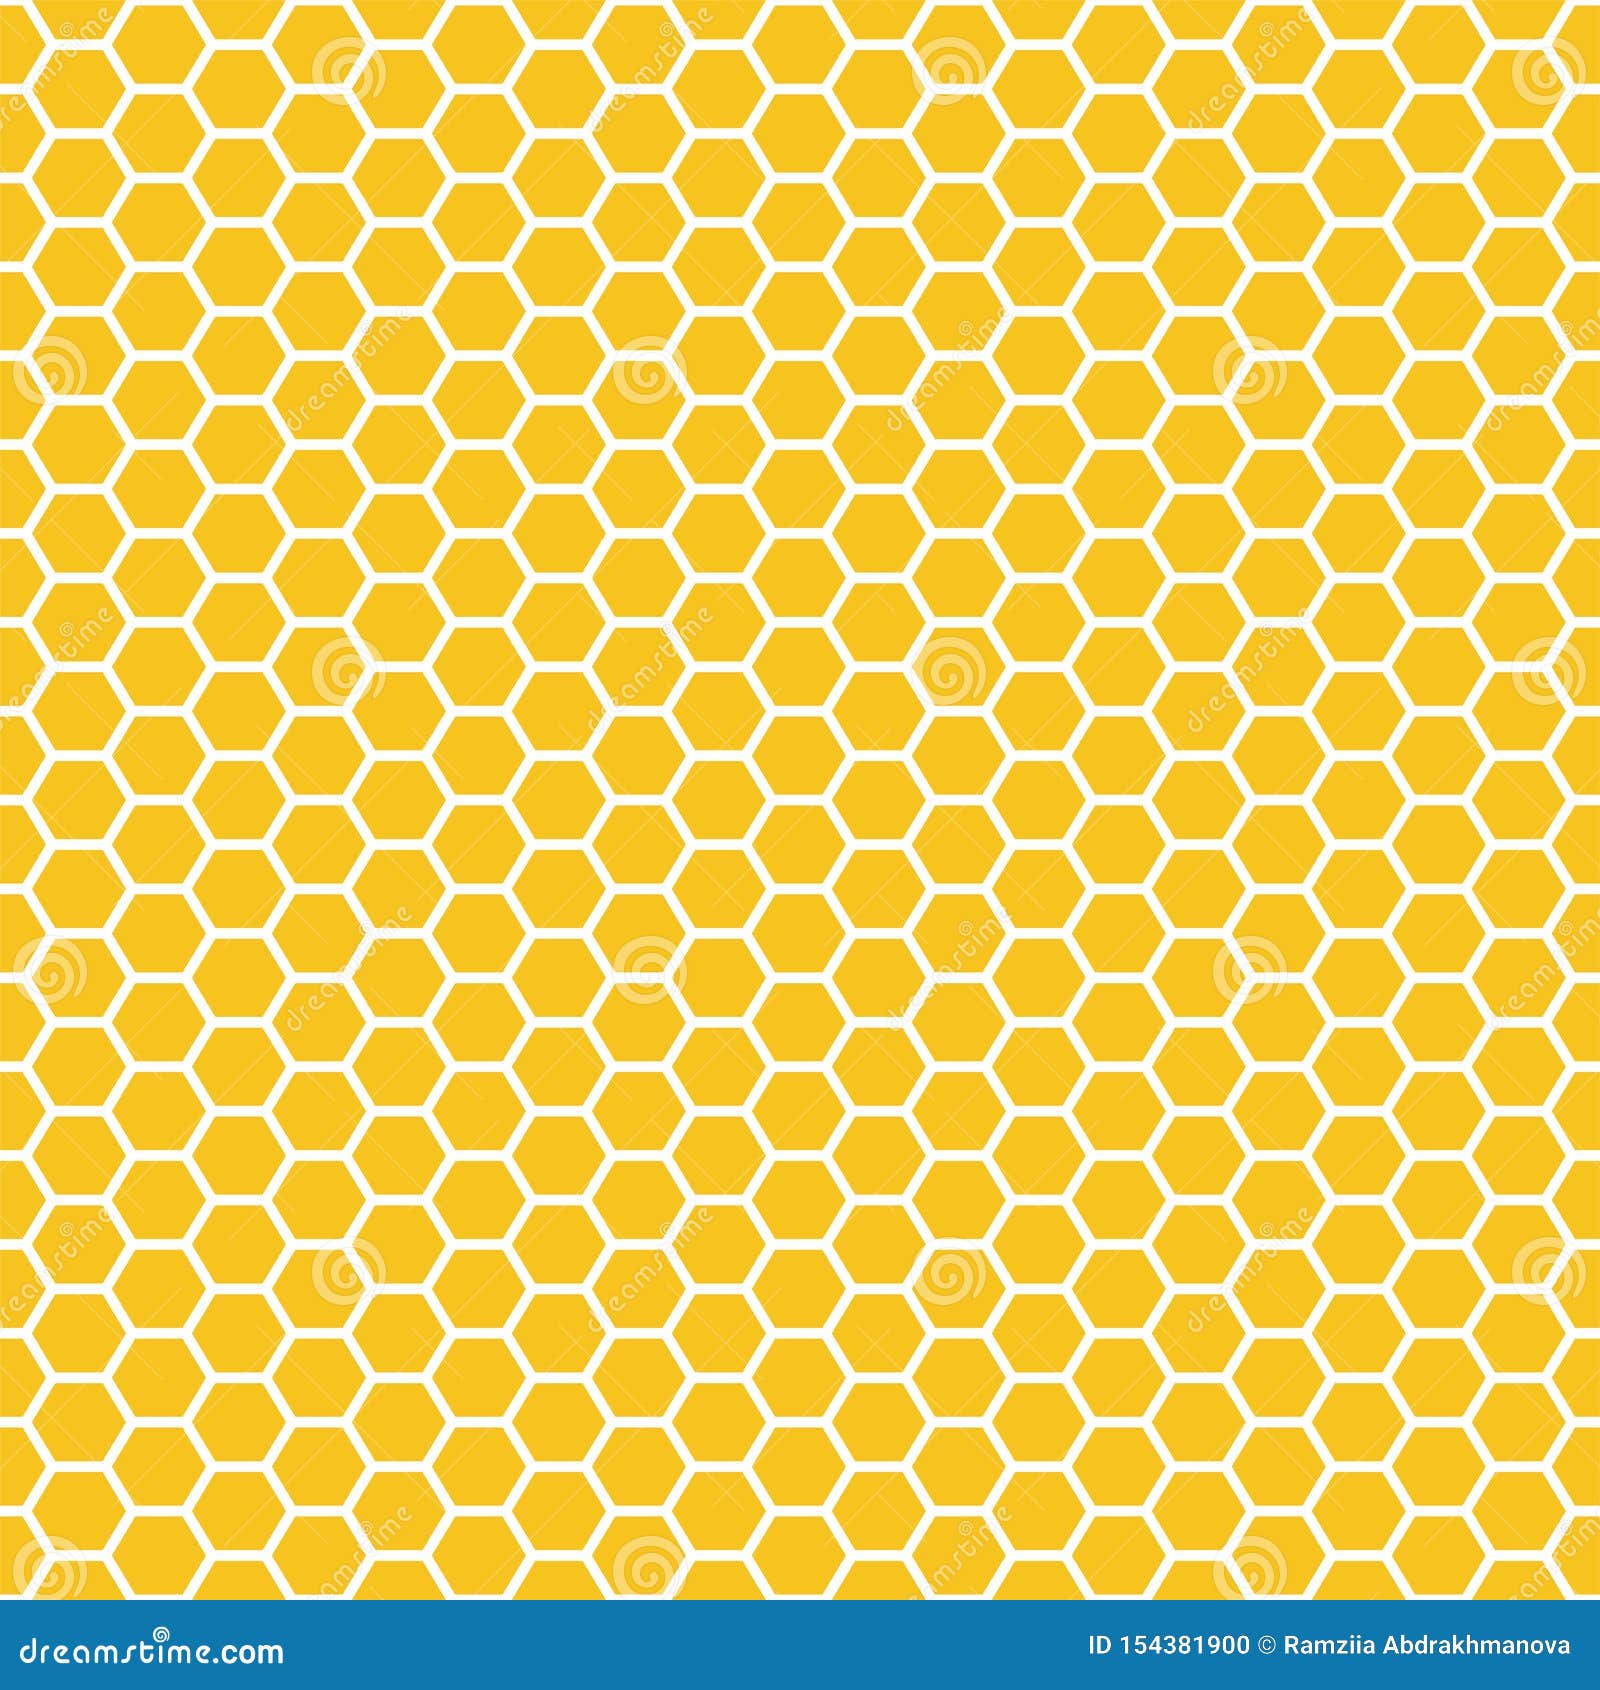 seamless pattern. honeycomb. grid texture.  . scrapbook, gift wrapping paper, textiles. abstract yellow simple